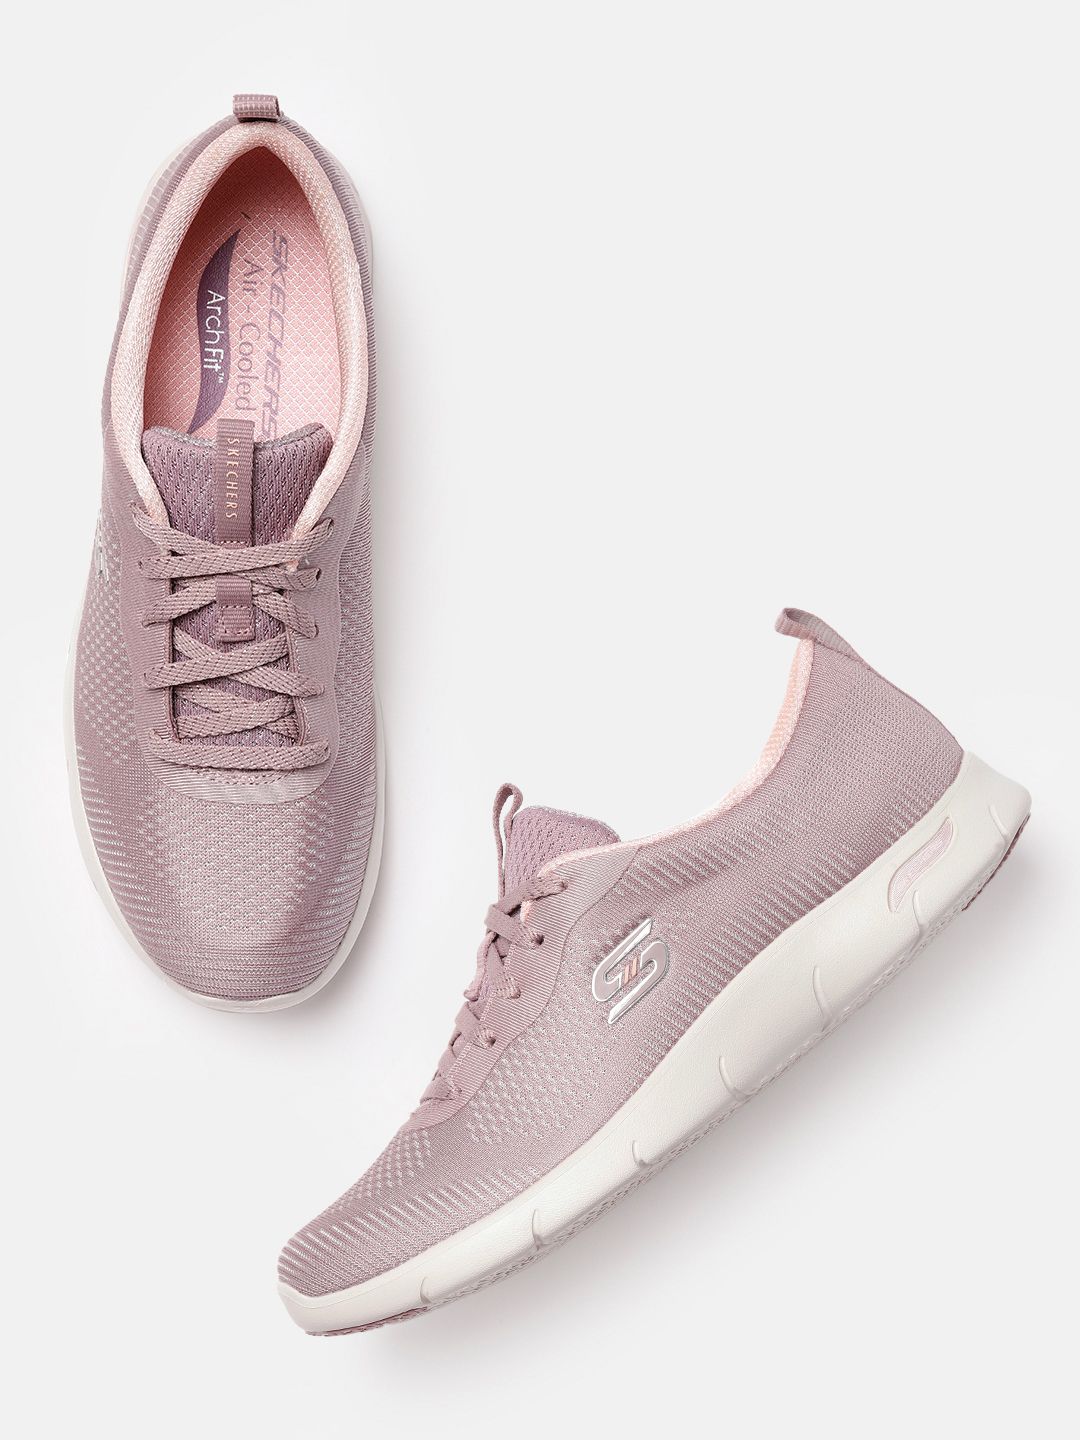 Skechers Women Mauve Pink Textured Arch Fit Refine Classy Doll Regular Sneakers Price in India